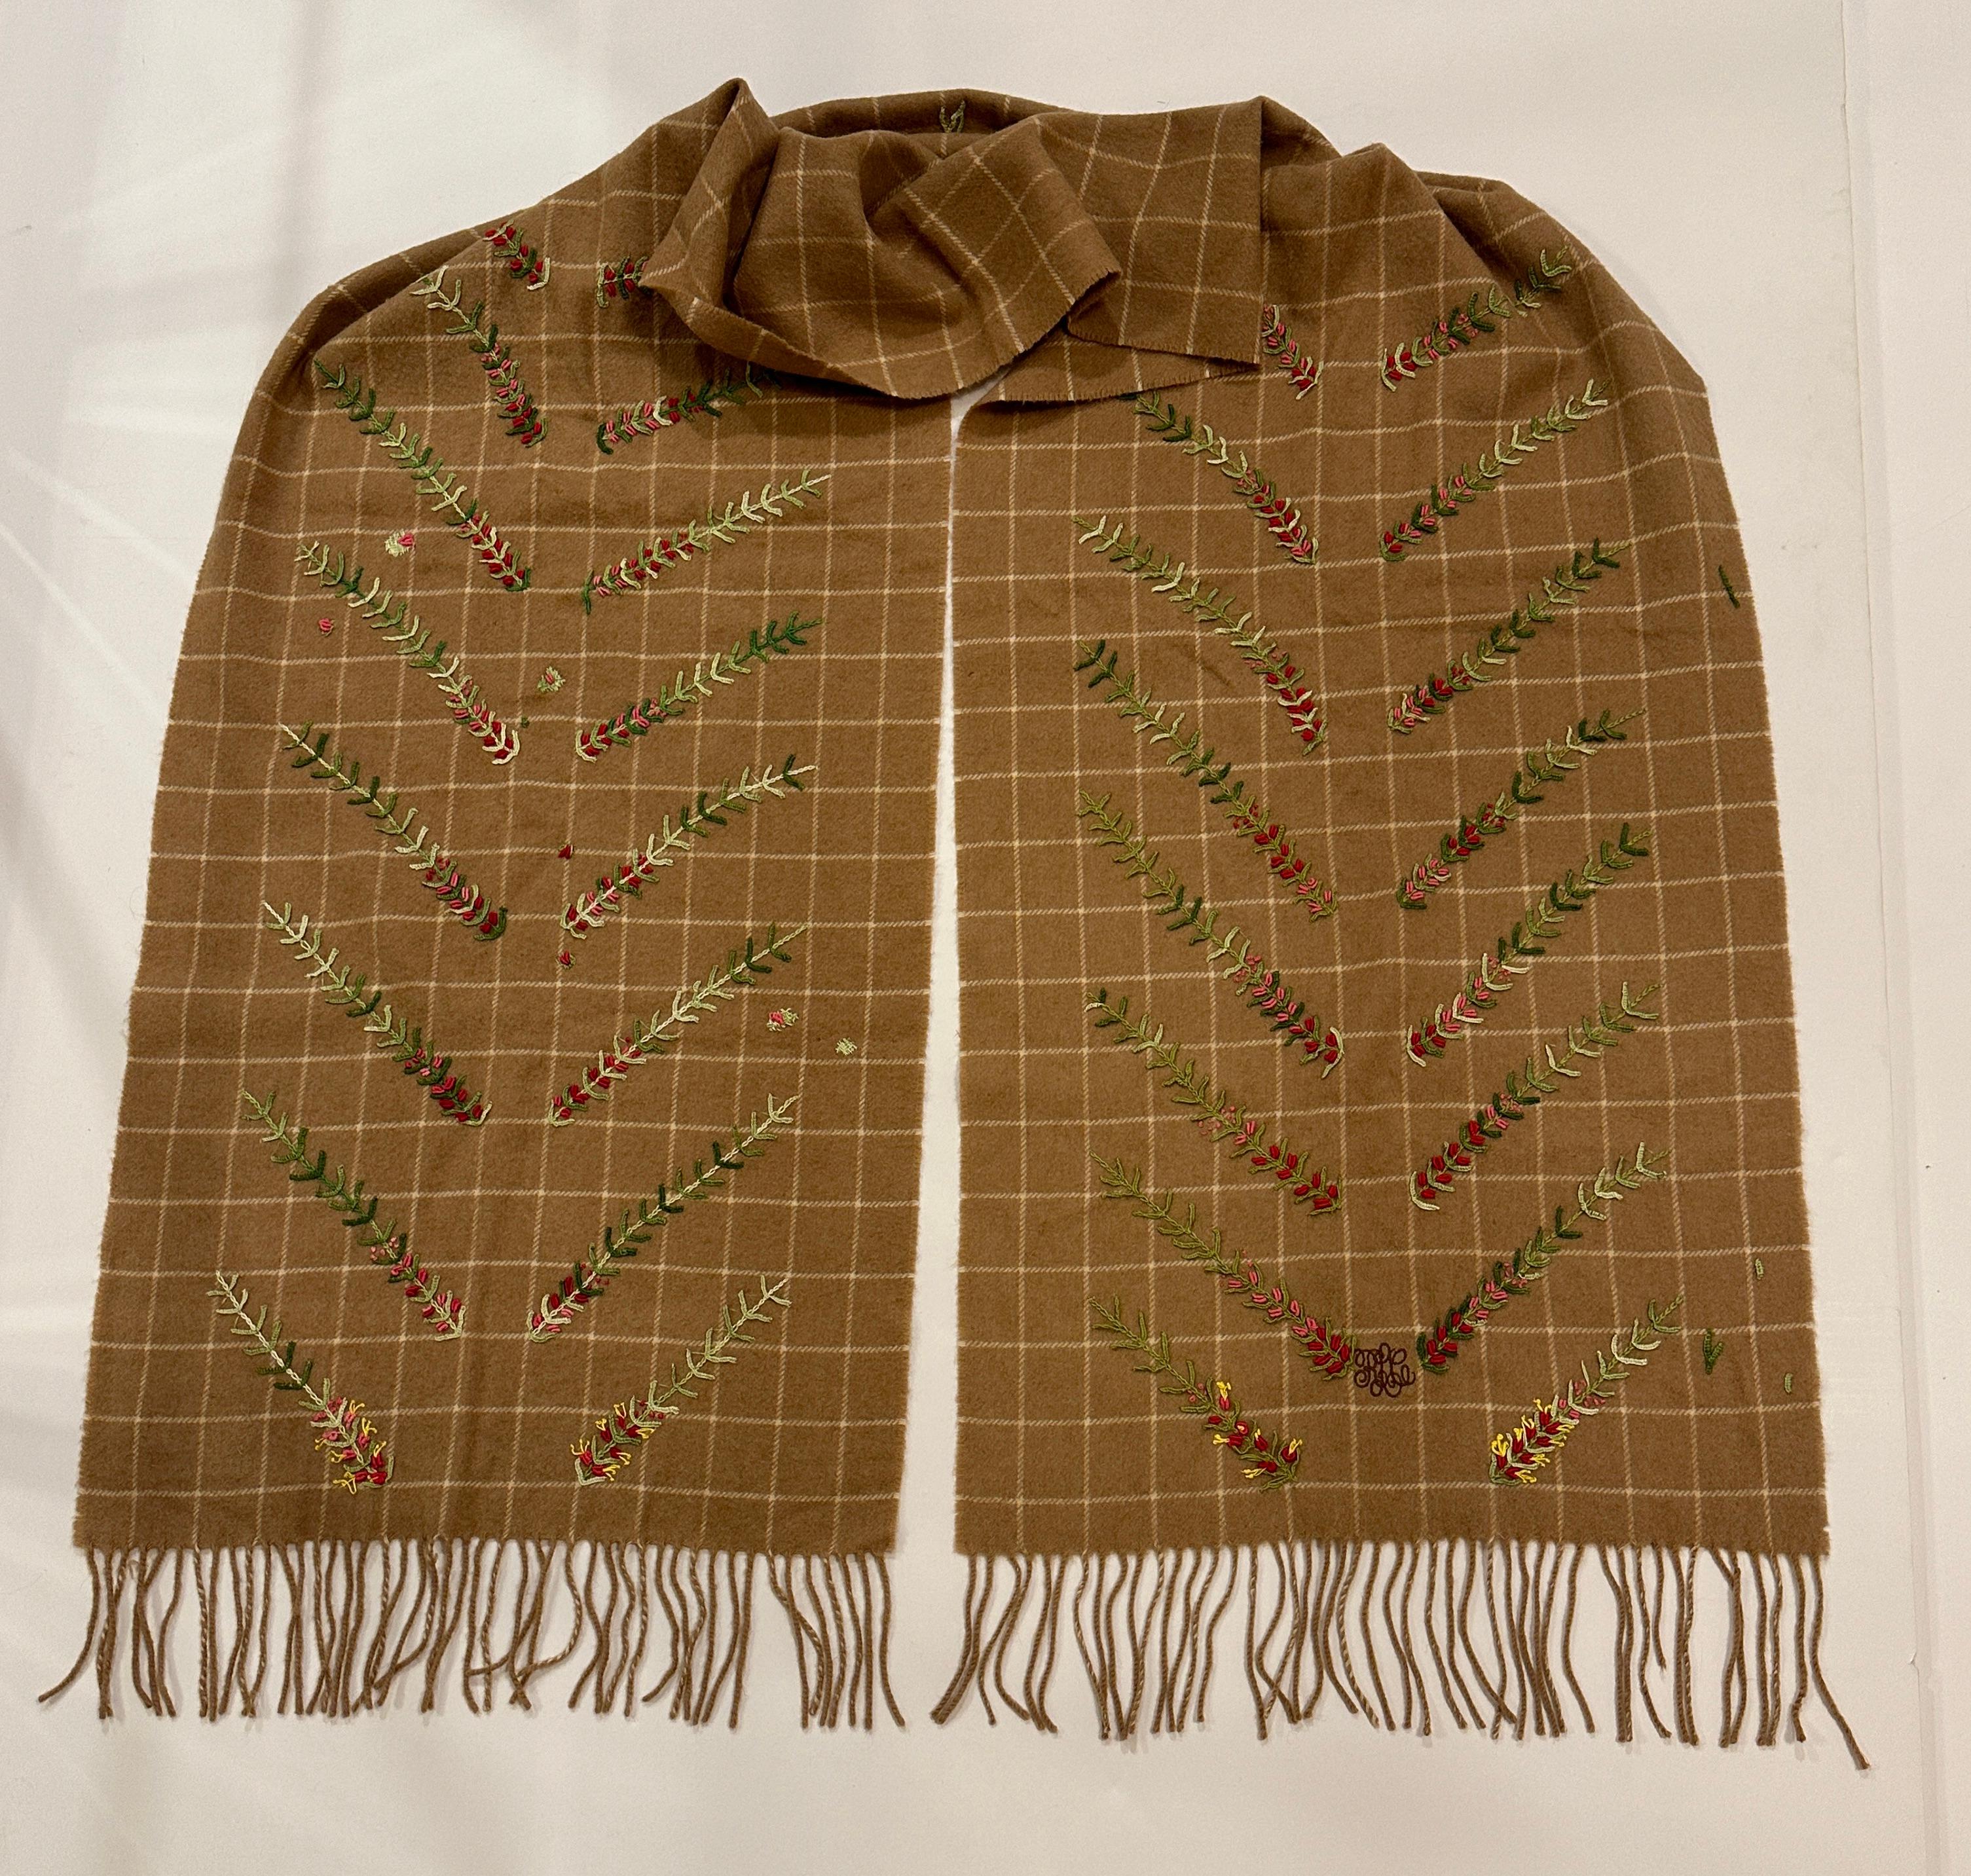 Ralph Lauren Huge Hand-Embroidered Camel-Hair Fringed Shawl For Sale 10